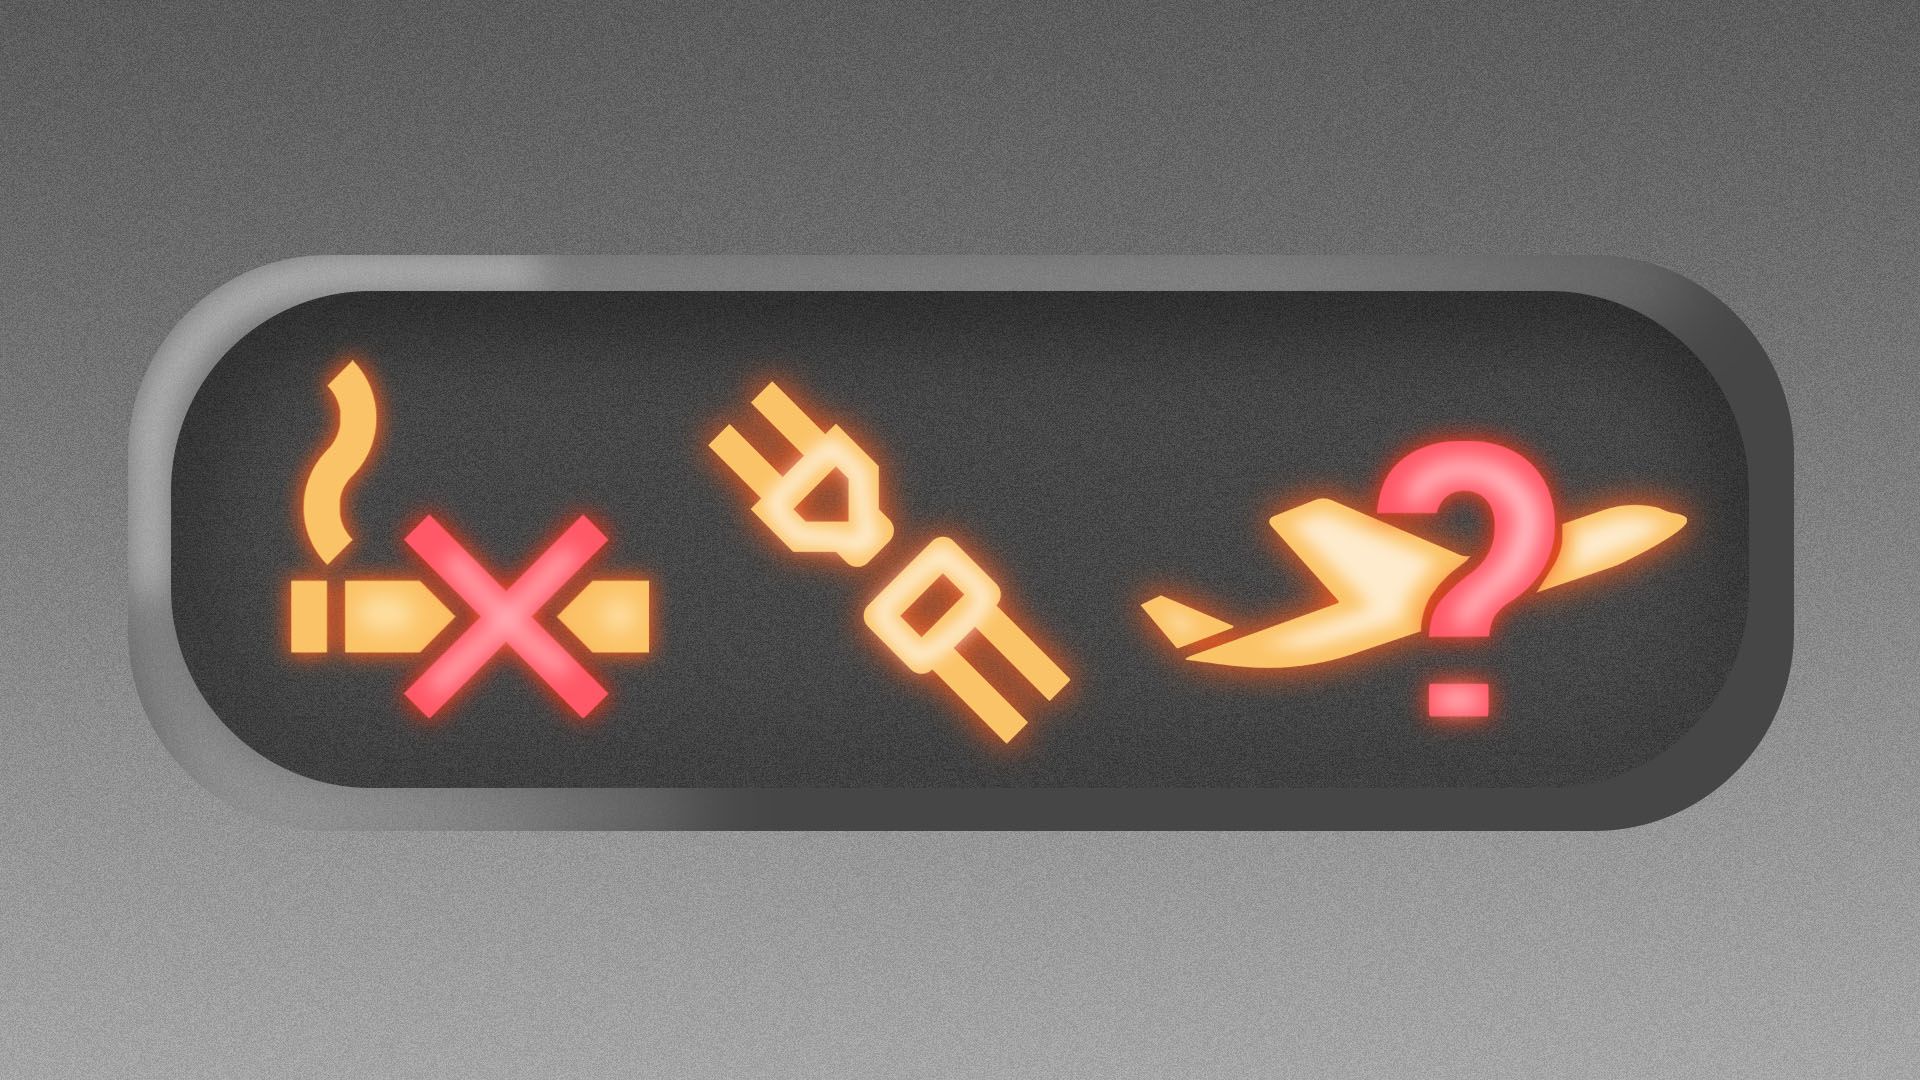 Illustration of an overhead panel in a plane with the no smoking and buckle seatbelt signs lit up, along with a third featuring an airplane with a question mark.